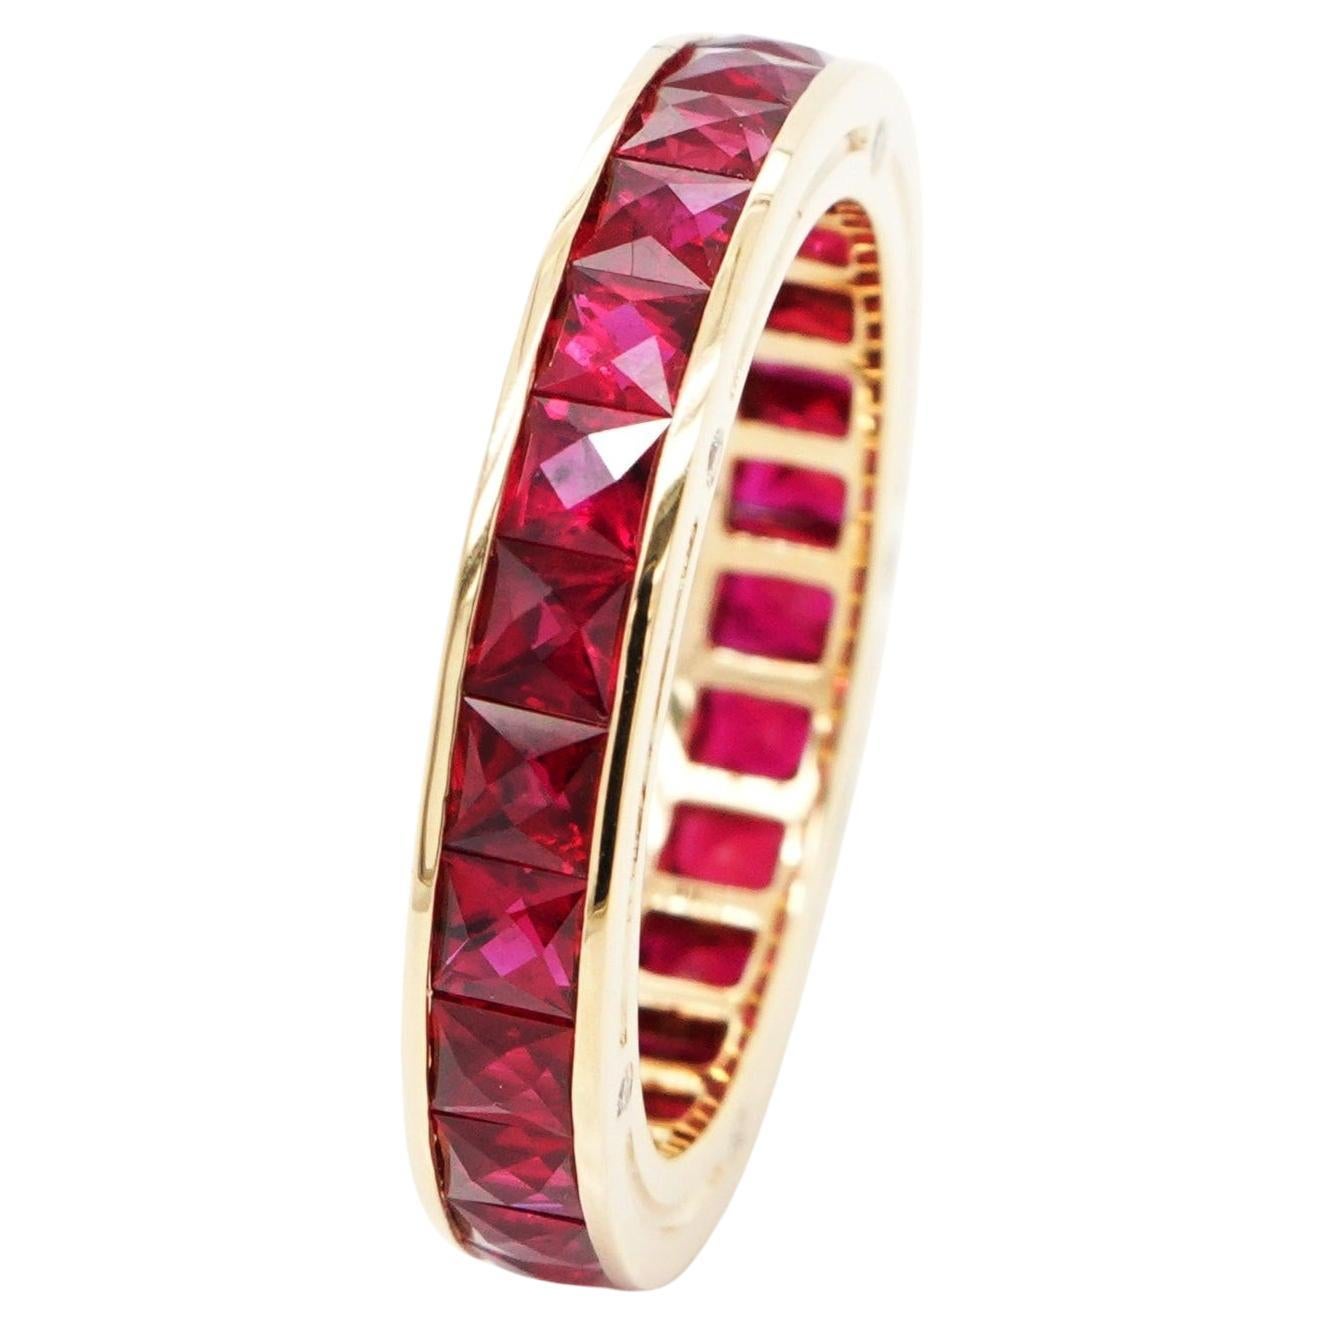 BENJAMIN FINE JEWELRY 3.19 cts French Cut Ruby 18K Eternity Band Ring For Sale